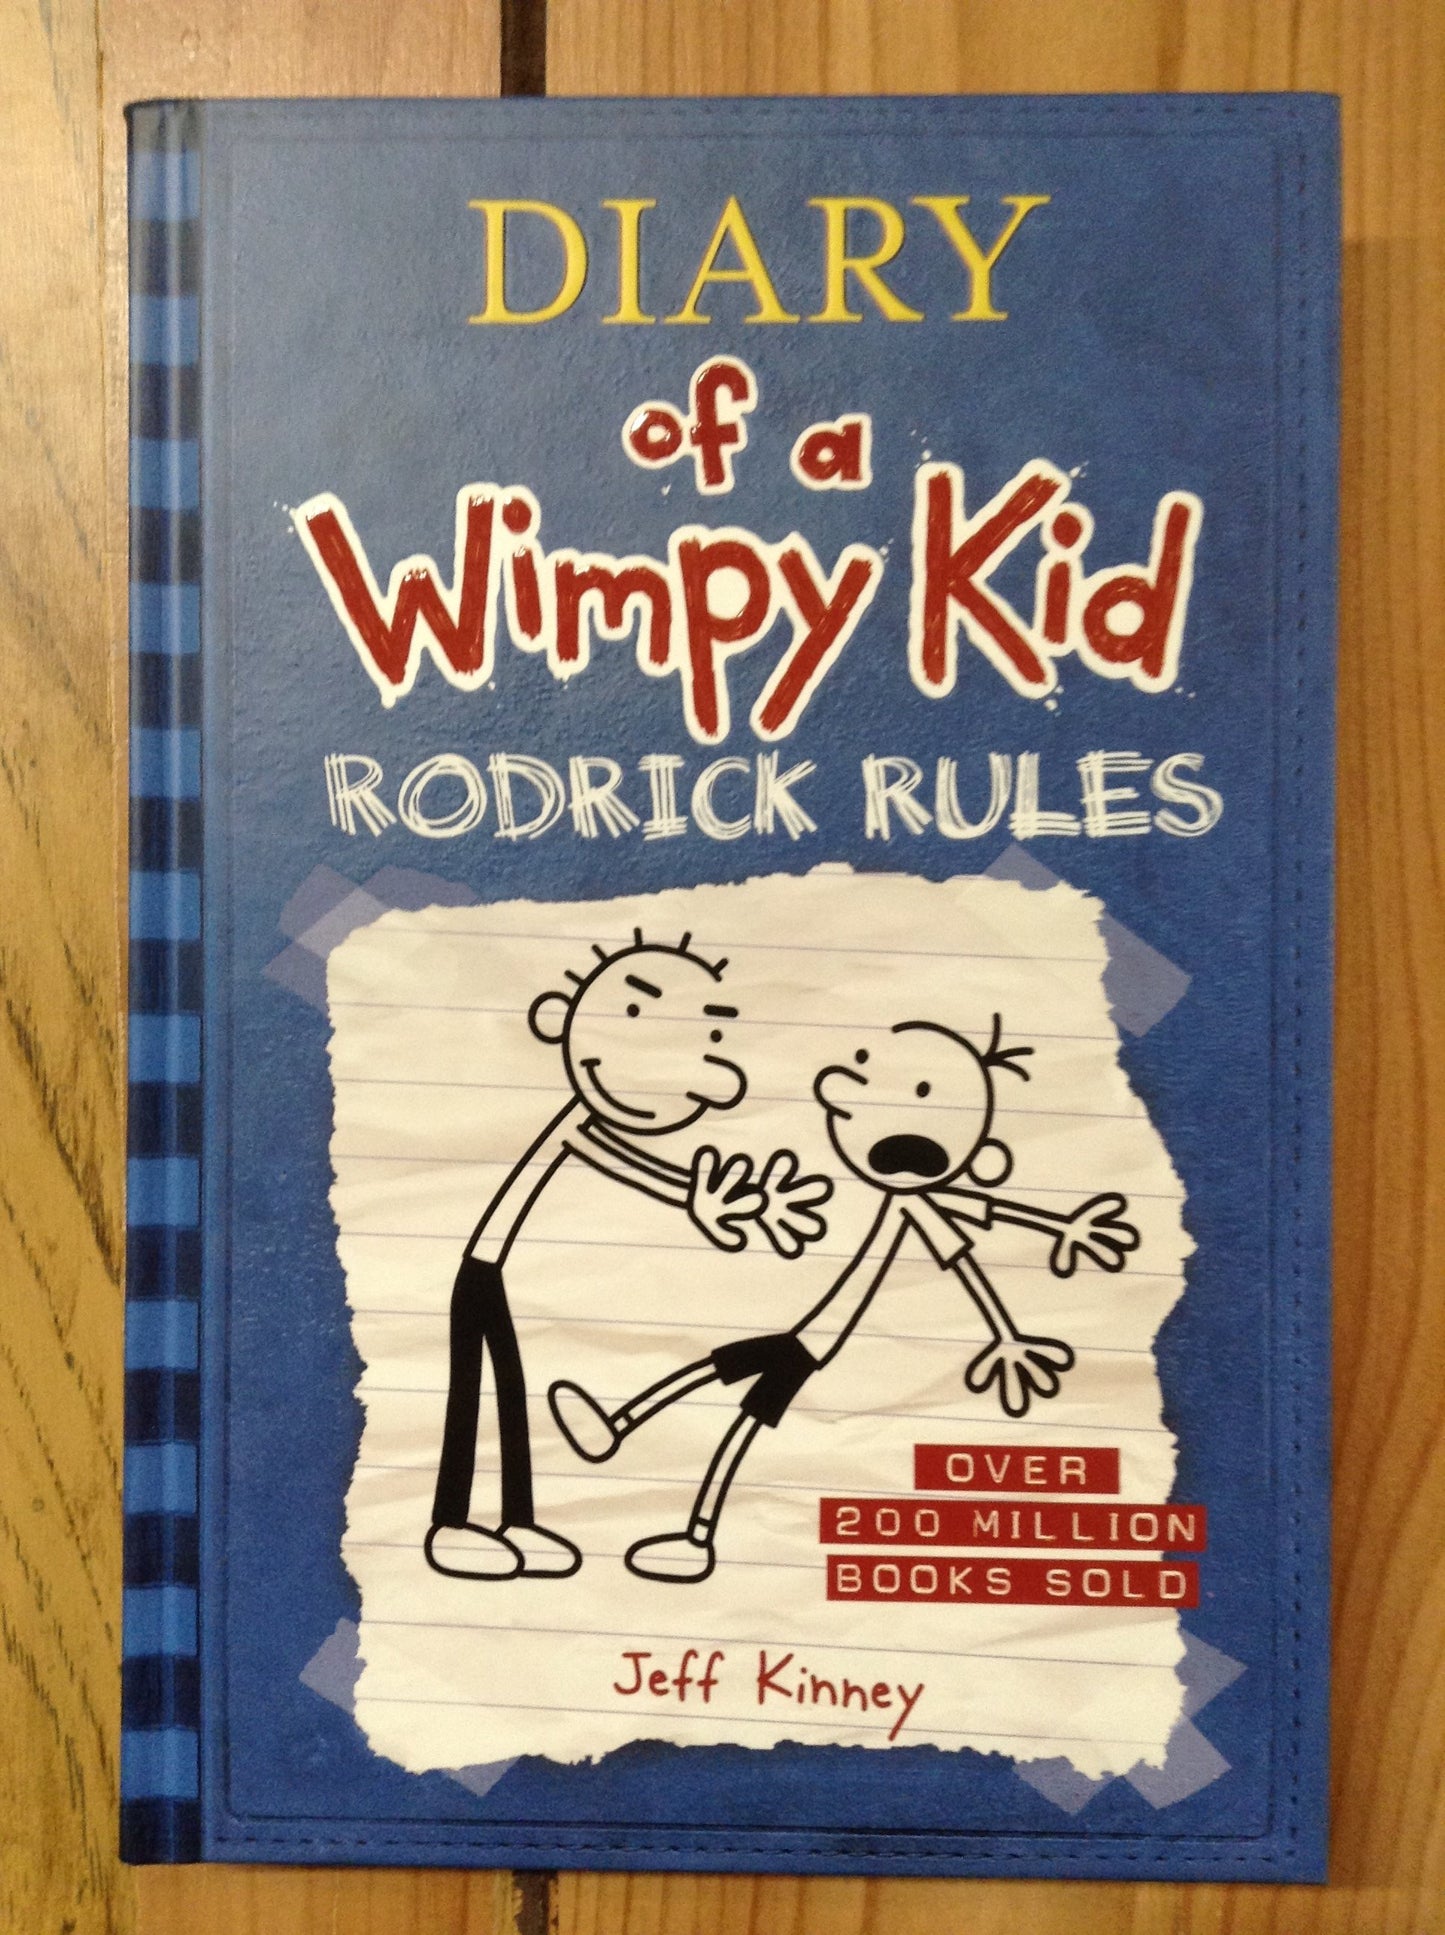 Diary of a Wimpy Kid #2: Rodrick Rules